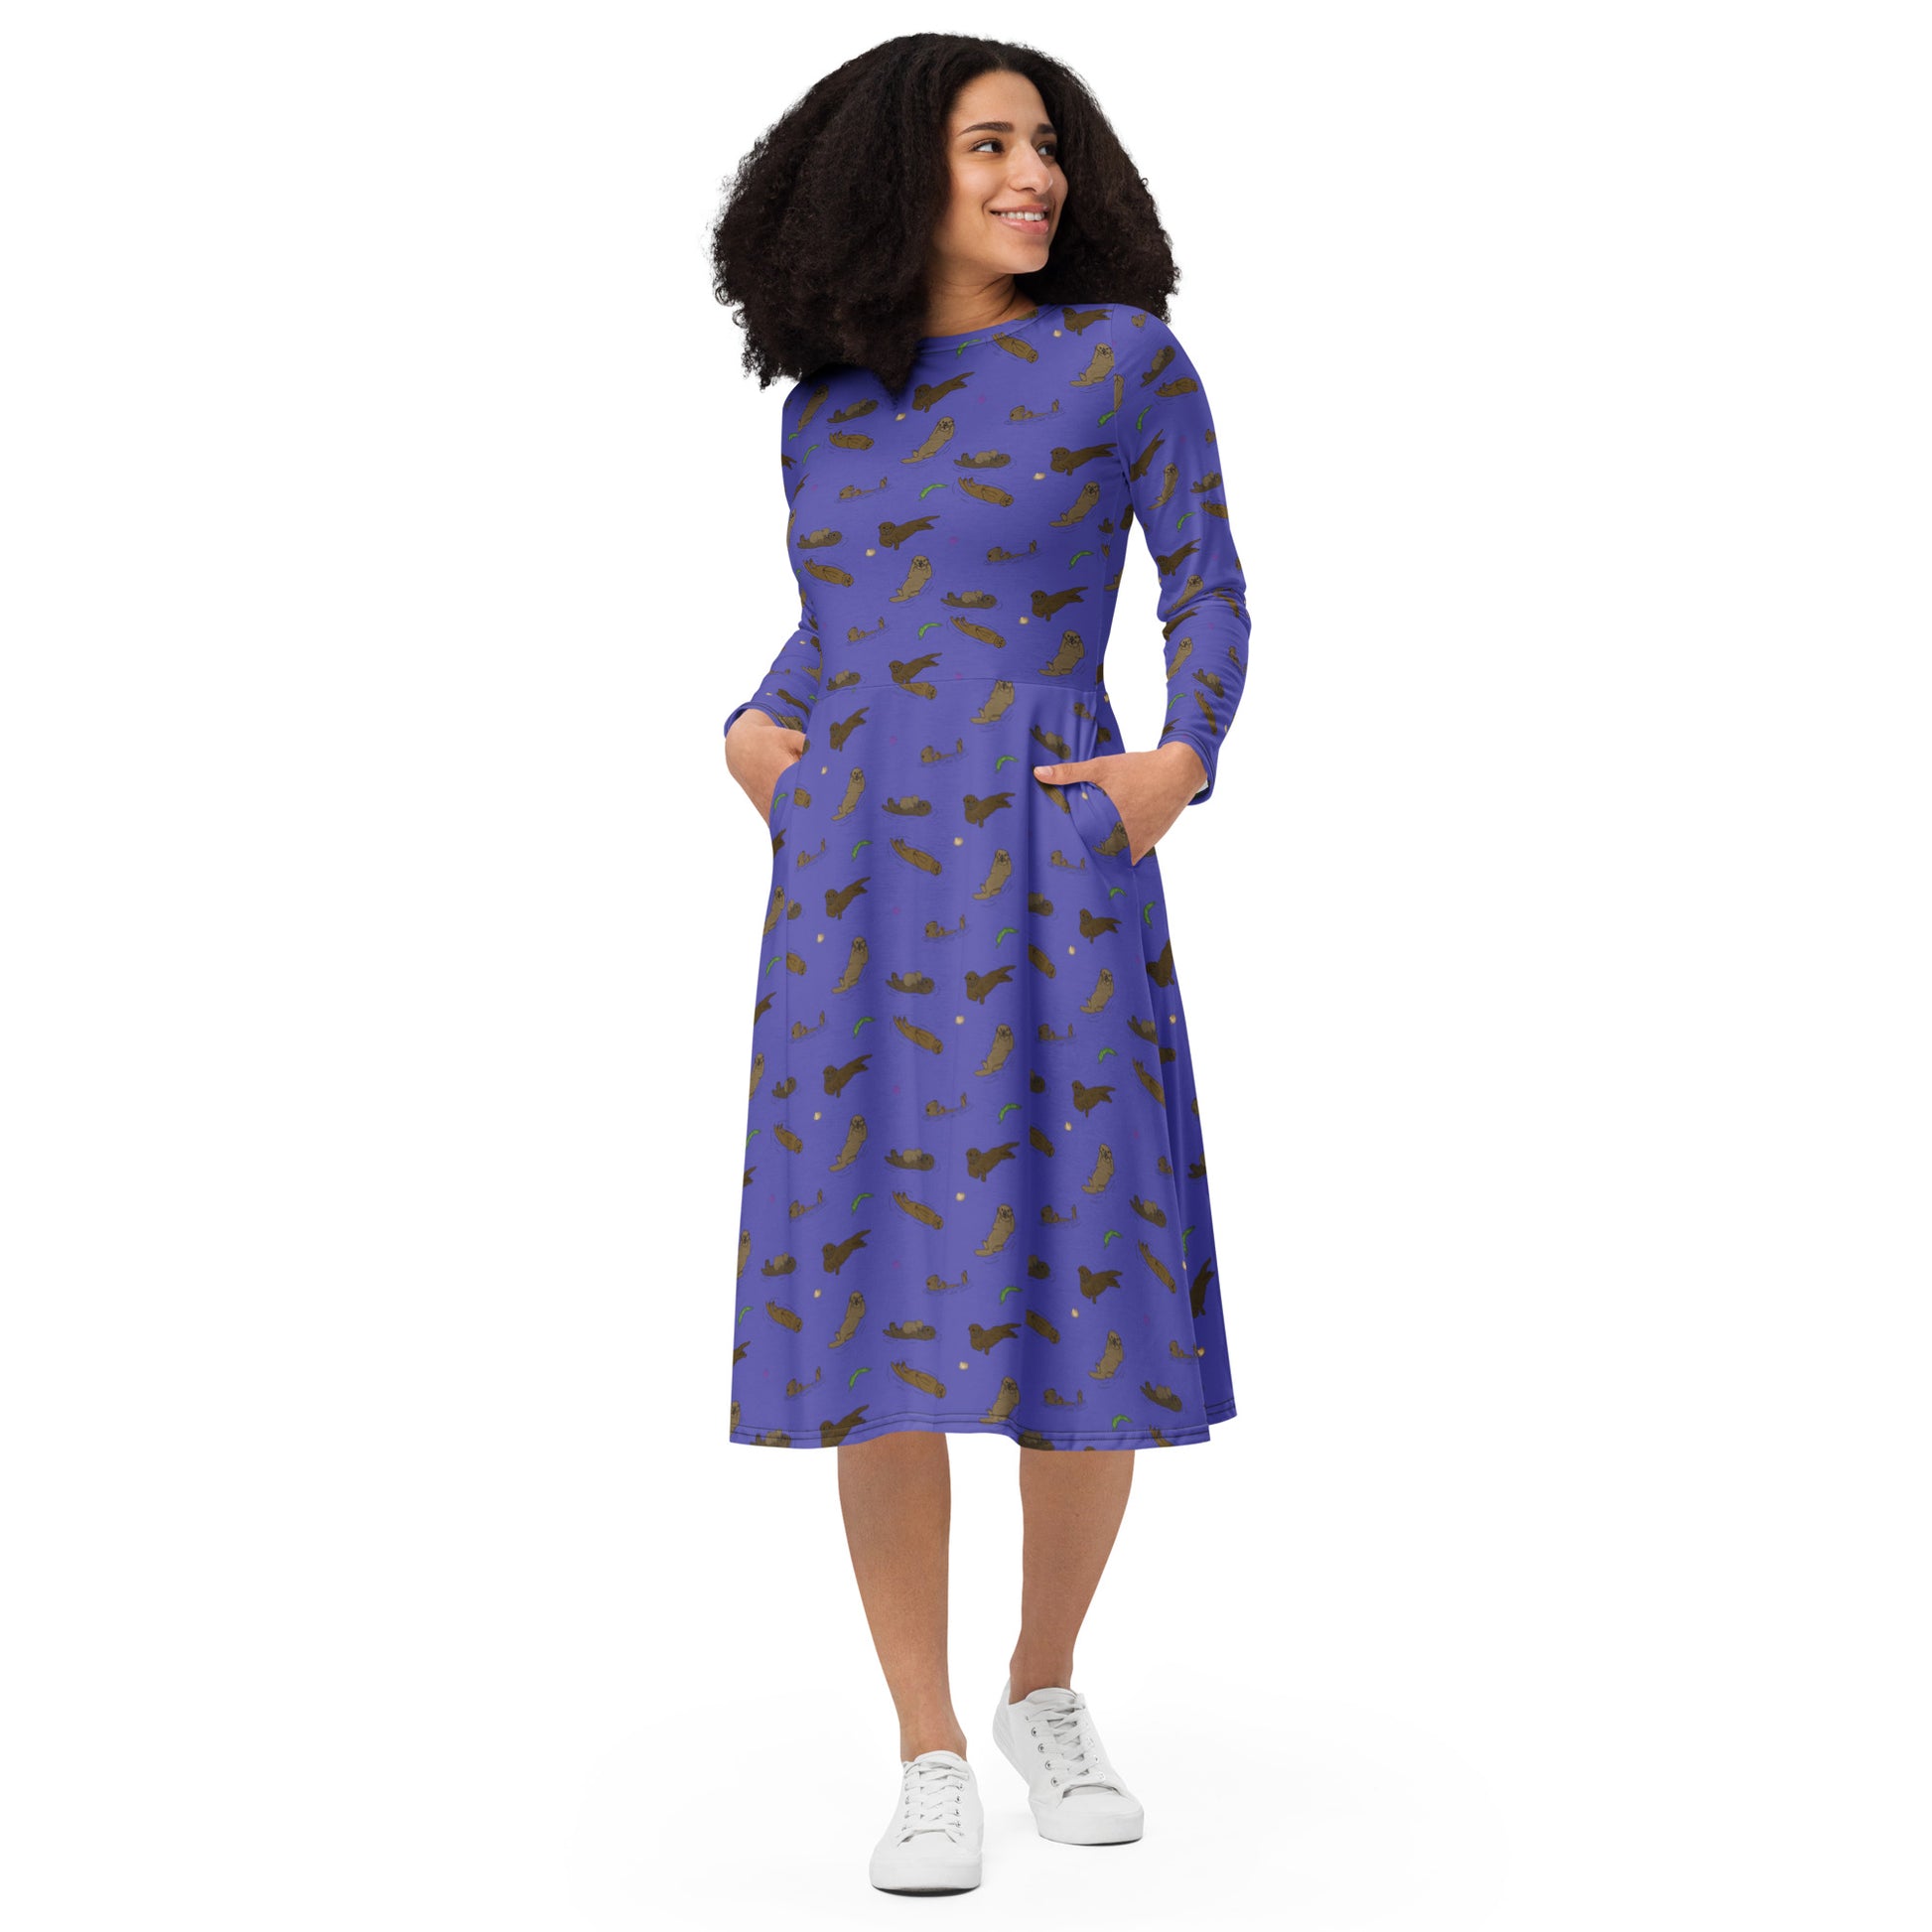 Long sleeve midi dress with fitted waist, flared bottom, and side pockets. Features a patterned design of sea otters, seashells, seaweed, and sea urchins on a purple background. Shown on female model.